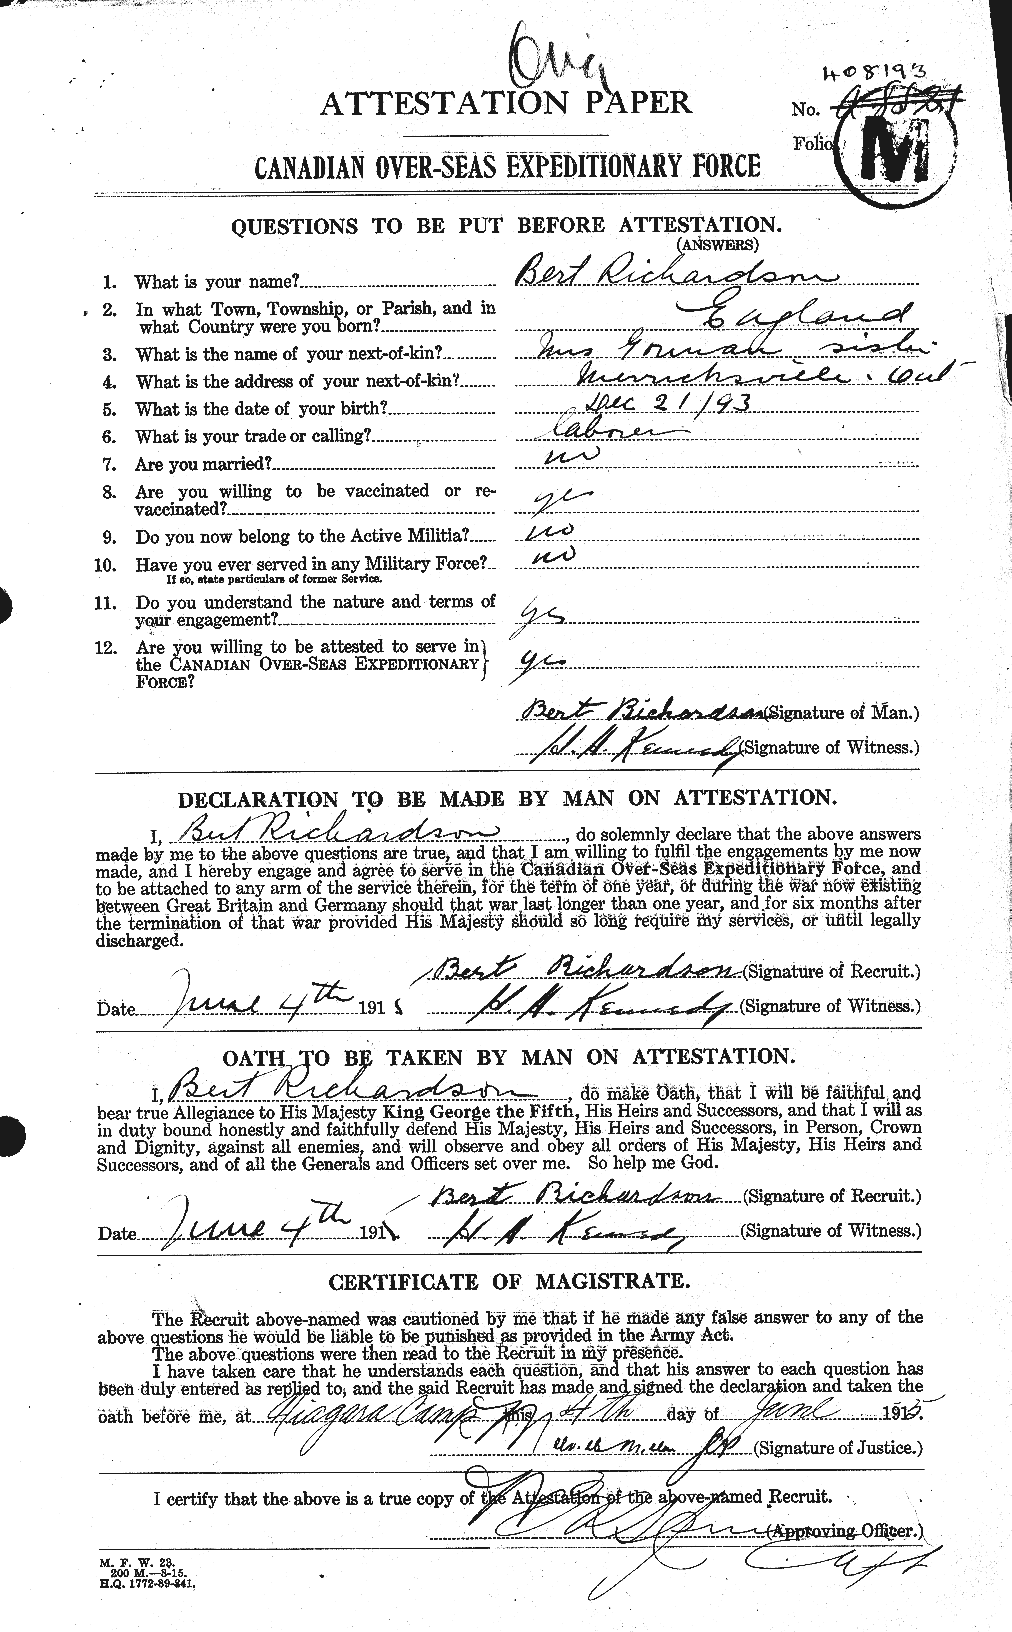 Personnel Records of the First World War - CEF 603531a